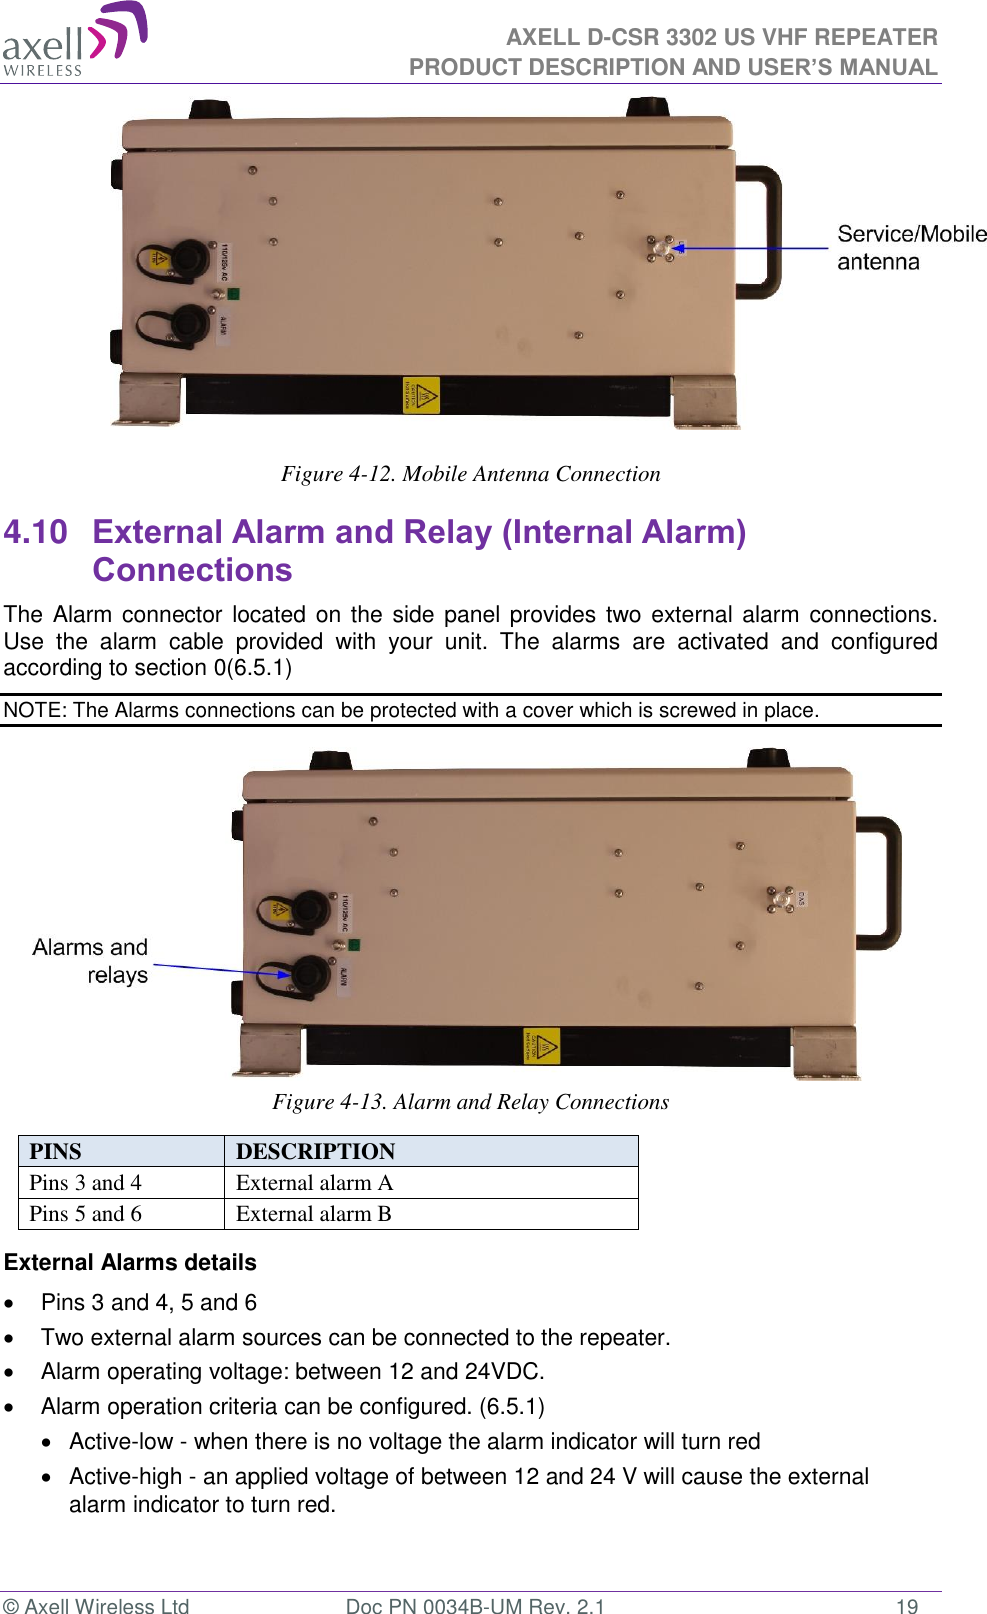 AXELL D-CSR 3302 US VHF REPEATER PRODUCT DESCRIPTION AND USER’S MANUAL  © Axell Wireless Ltd  Doc PN 0034B-UM Rev. 2.1  19        Figure 4-12. Mobile Antenna Connection  4.10 External Alarm and Relay (Internal Alarm) Connections The Alarm connector located on the  side panel provides two external alarm  connections.  Use  the  alarm  cable  provided  with  your  unit.  The  alarms  are  activated  and  configured according to section 0(6.5.1) NOTE: The Alarms connections can be protected with a cover which is screwed in place.        Figure 4-13. Alarm and Relay Connections  PINS  DESCRIPTION  Pins 3 and 4 External alarm A Pins 5 and 6 External alarm B External Alarms details   Pins 3 and 4, 5 and 6   Two external alarm sources can be connected to the repeater.   Alarm operating voltage: between 12 and 24VDC.    Alarm operation criteria can be configured. (6.5.1)   Active-low - when there is no voltage the alarm indicator will turn red   Active-high - an applied voltage of between 12 and 24 V will cause the external alarm indicator to turn red.   